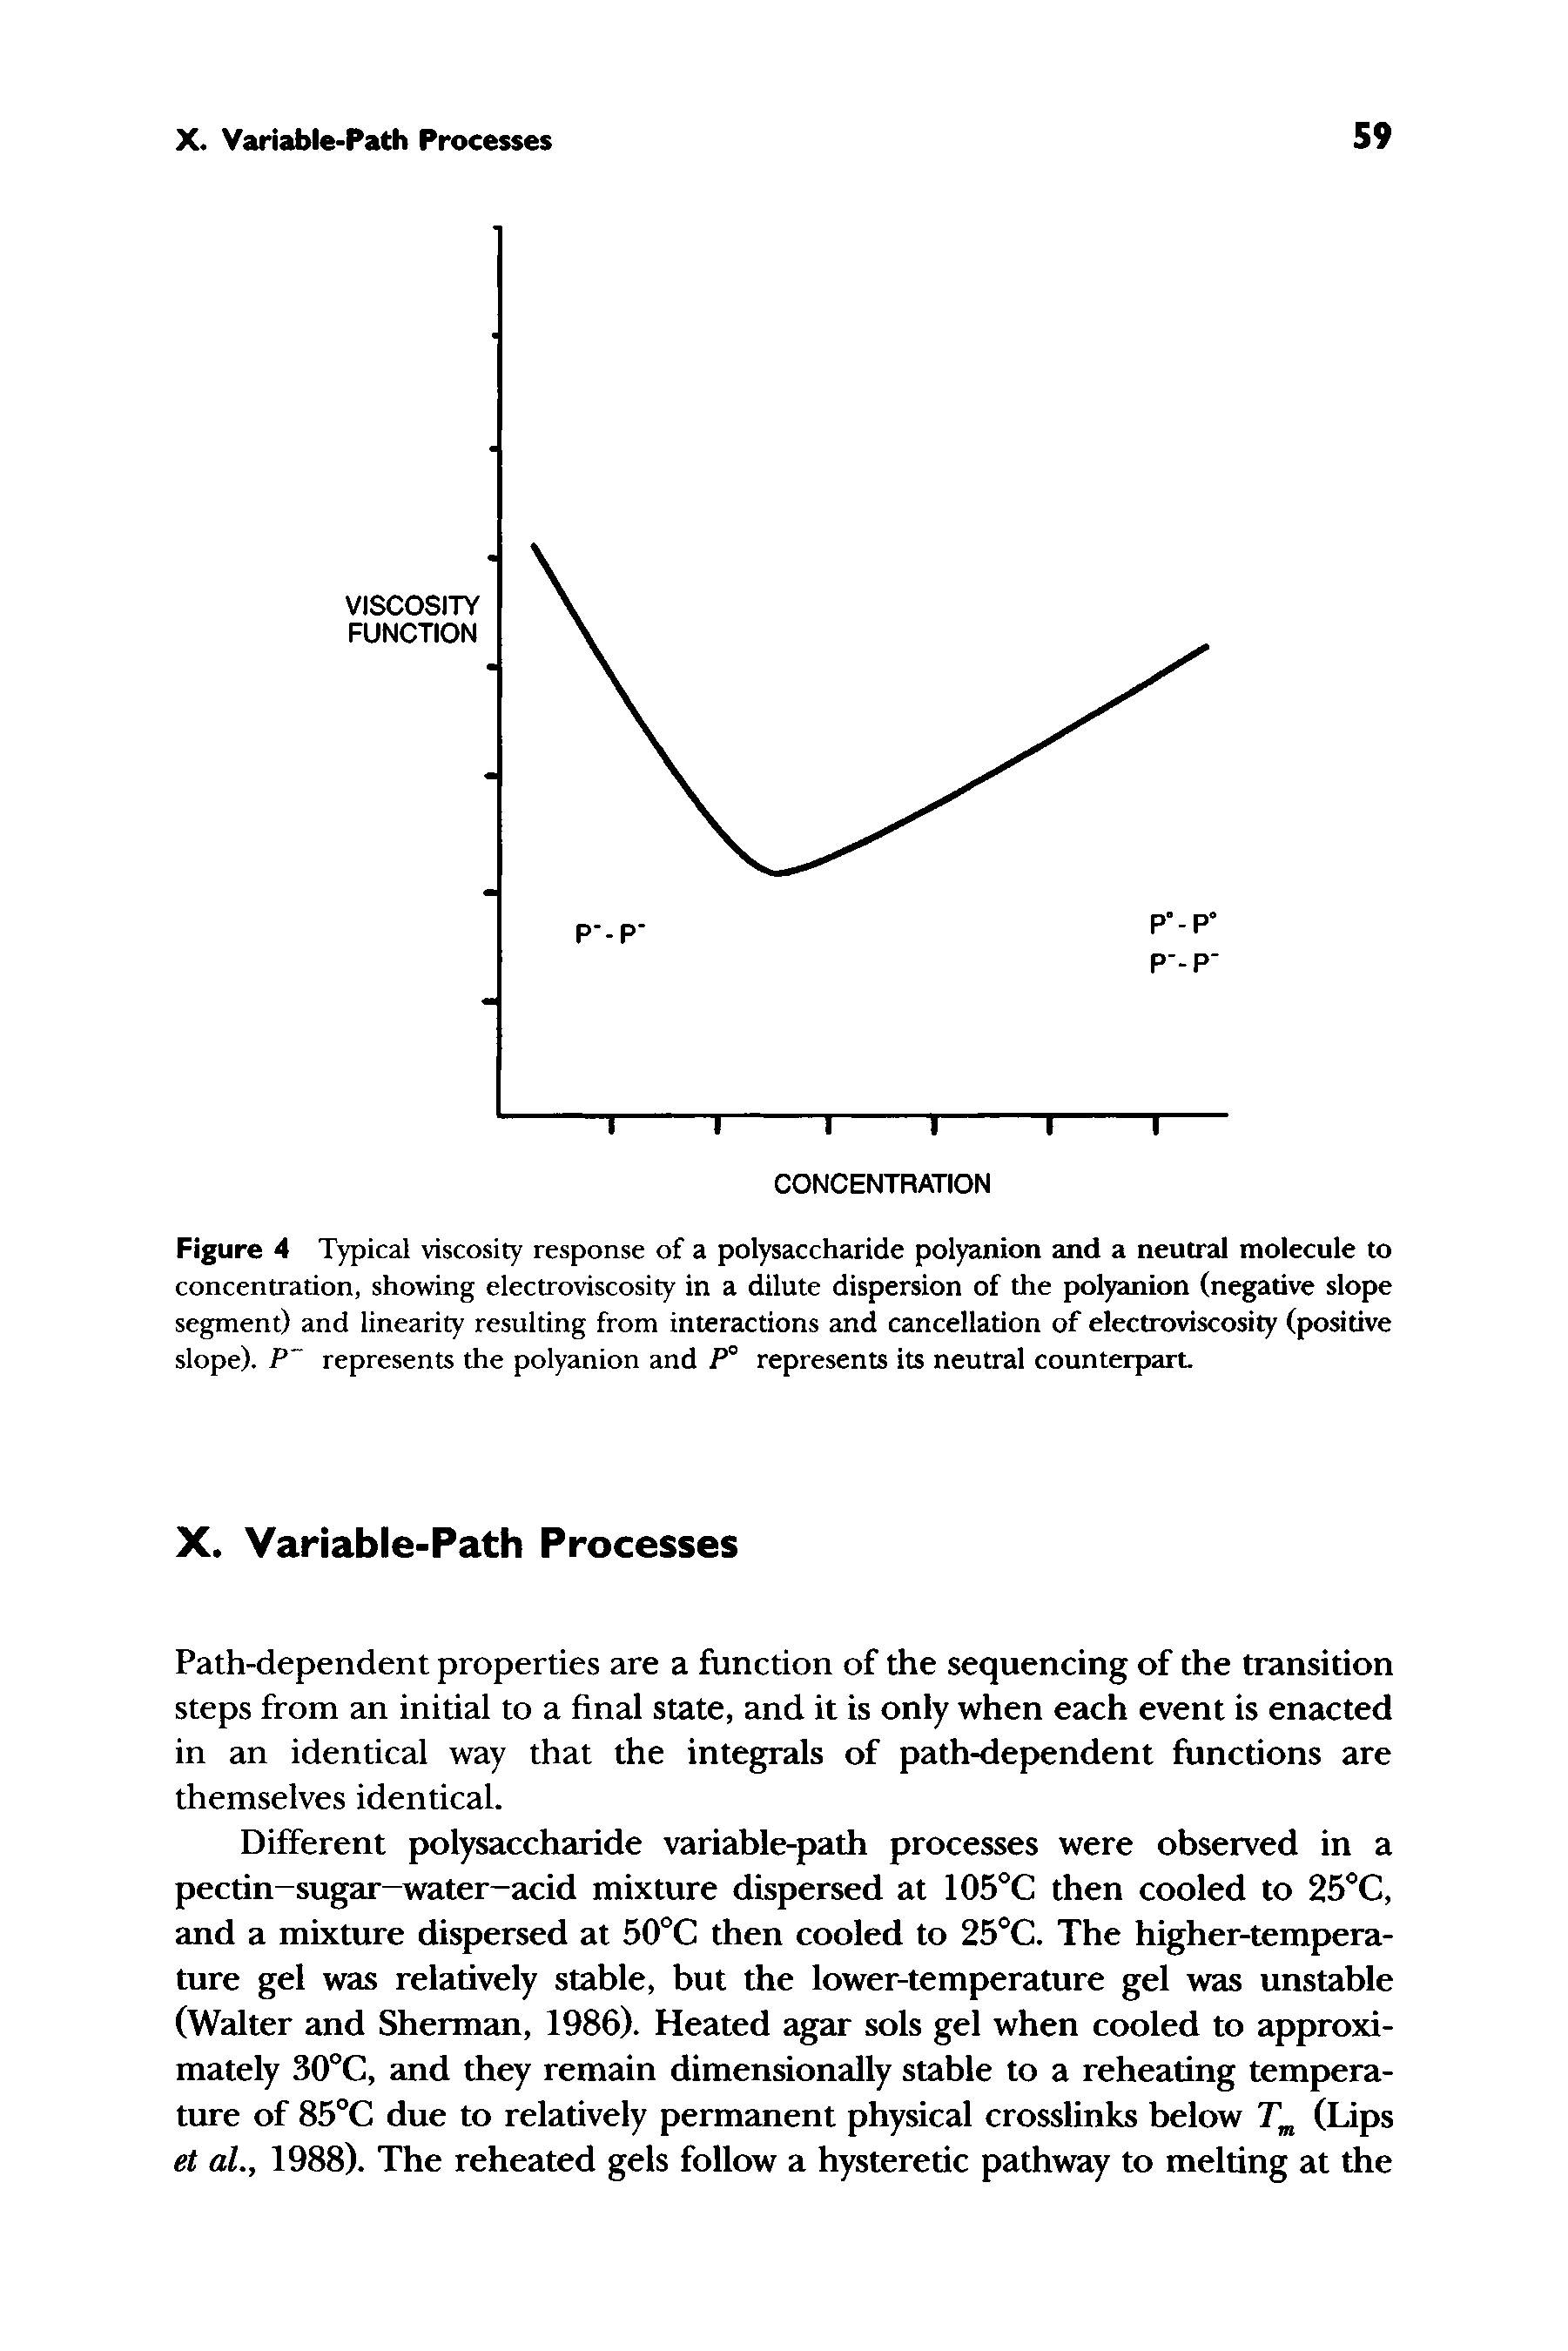 Figure 4 Typical viscosity response of a polysaccharide polyanion and a neutral molecule to concentration, showing electroviscosity in a dilute dispersion of the polyanion (negative slope segment) and linearity resulting from interactions and cancellation of electroviscosity (positive slope). P represents the polyanion and P° represents its neutral counterpart.